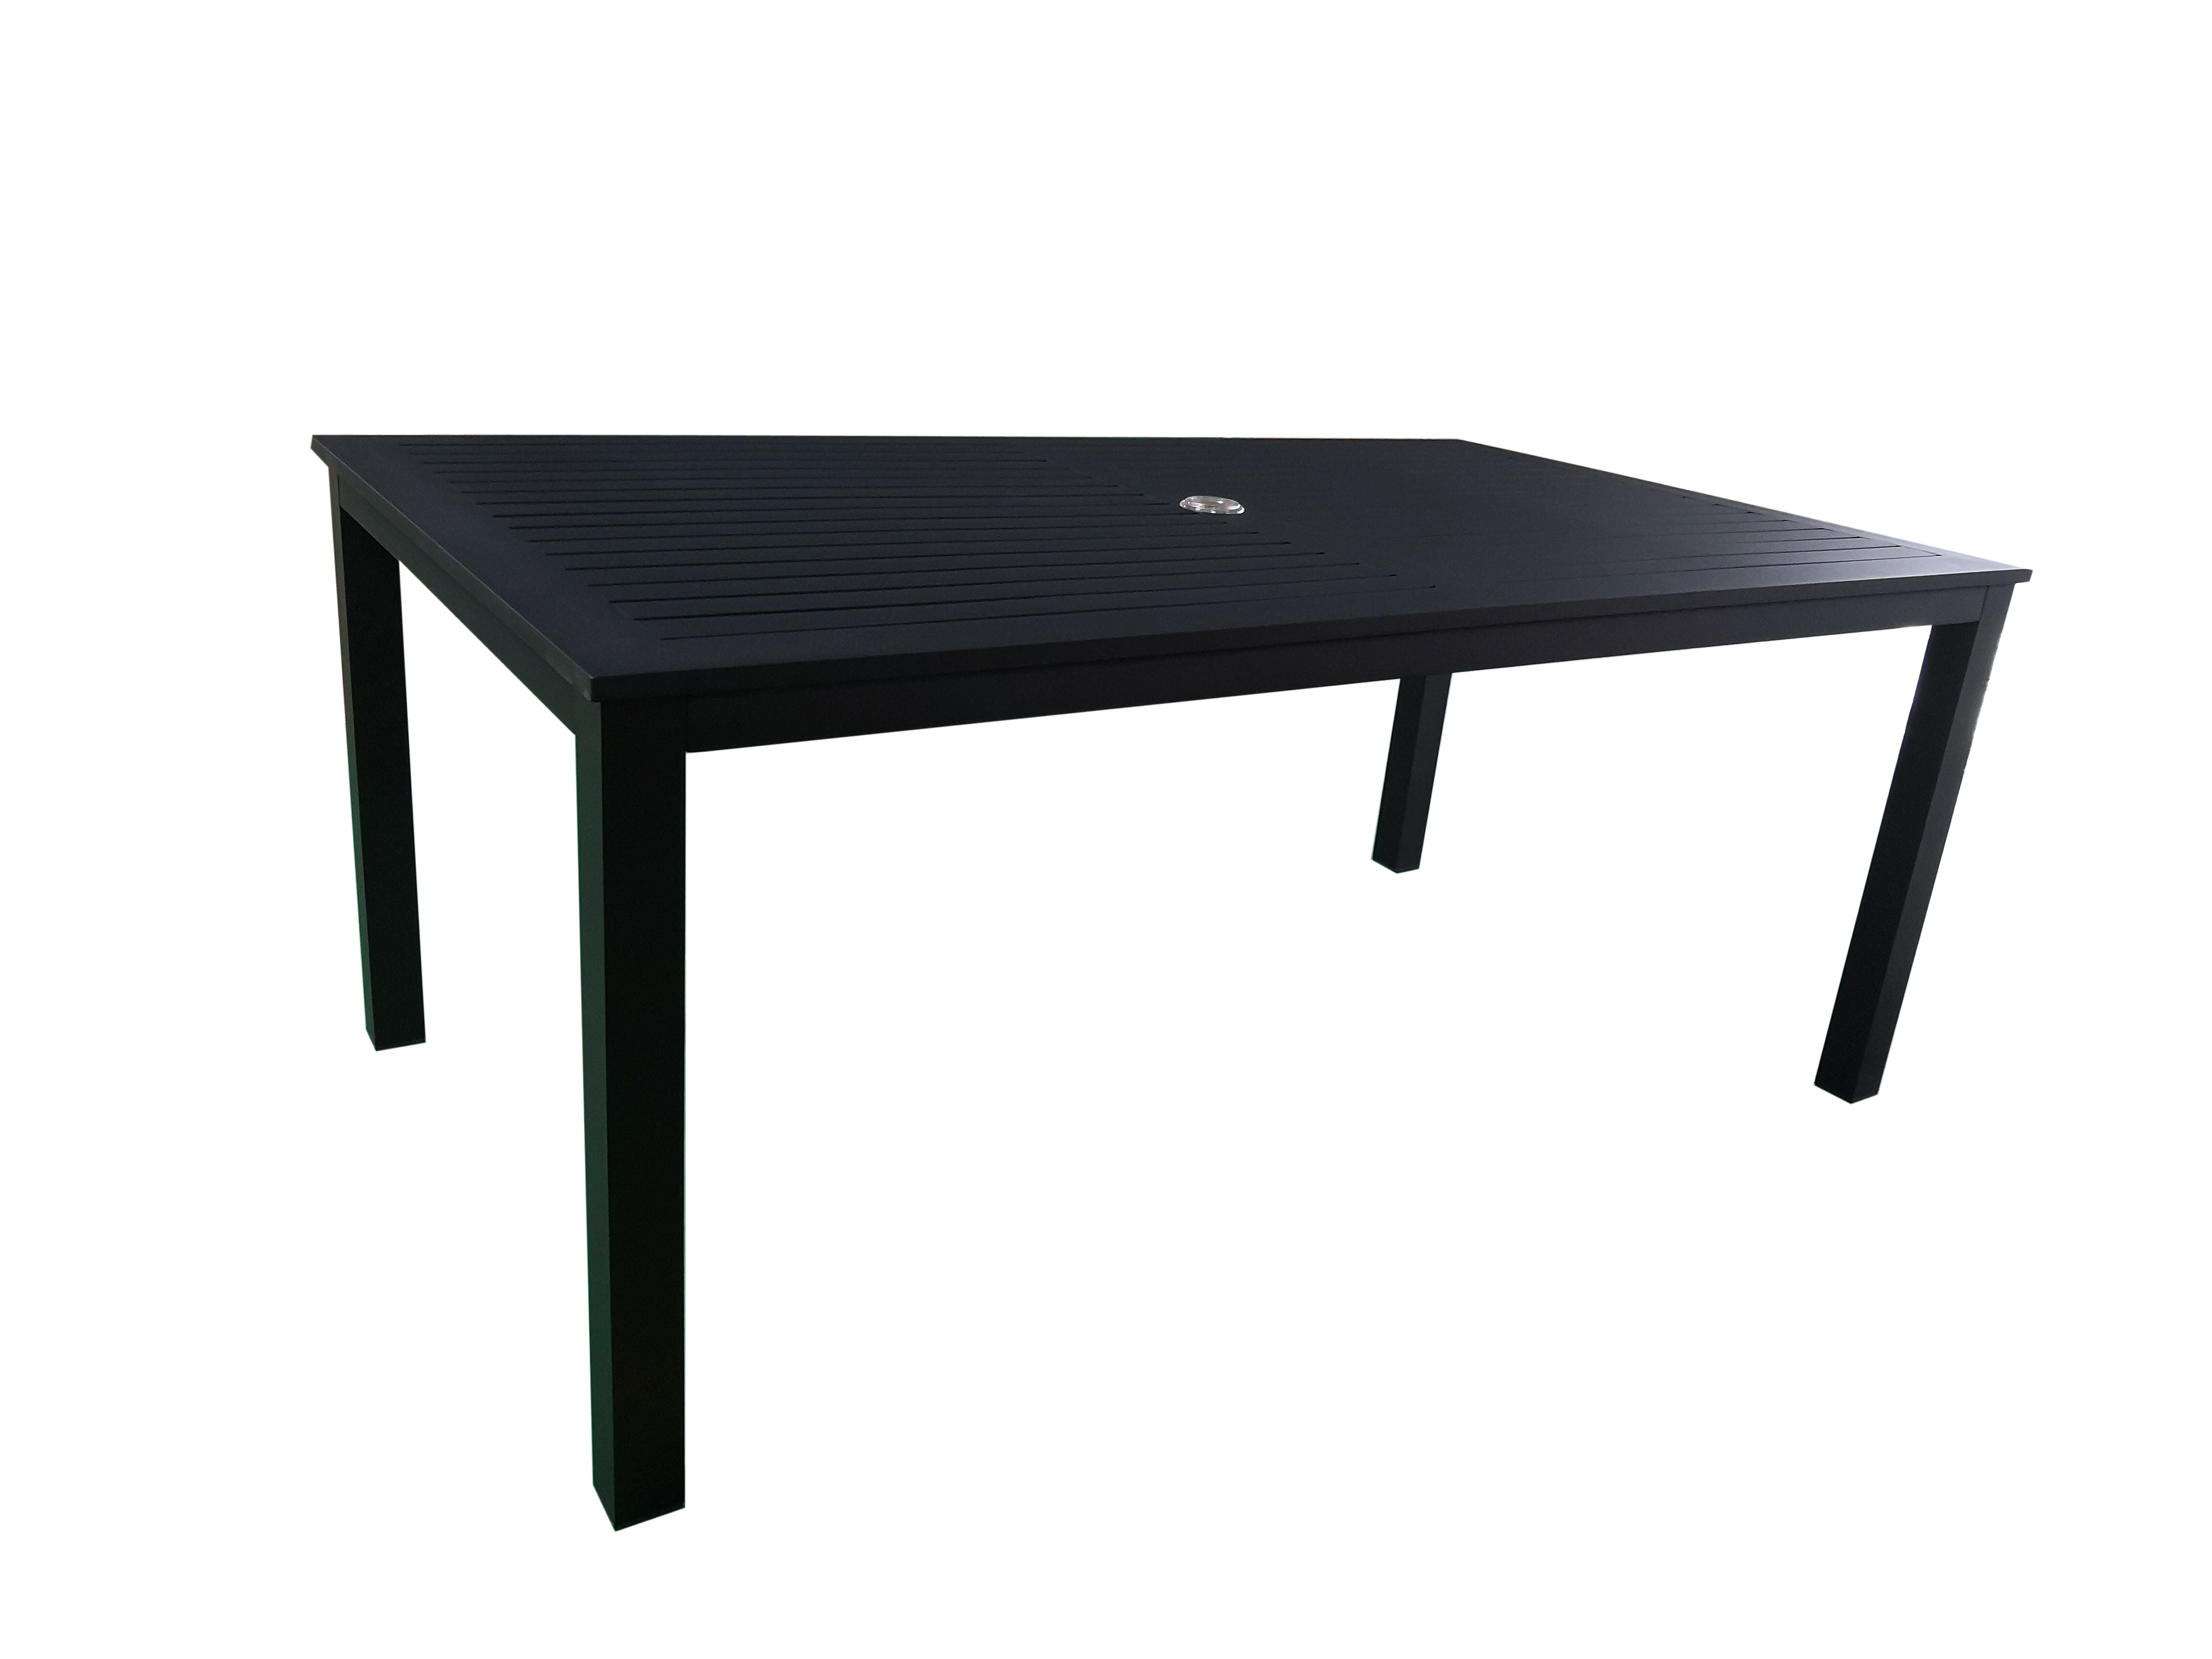 PatioZone Dining Table with Slated Tabletop w/Umbrella Hole in Middle and Aluminum Frame (MOSS-T297N) - Matte Black